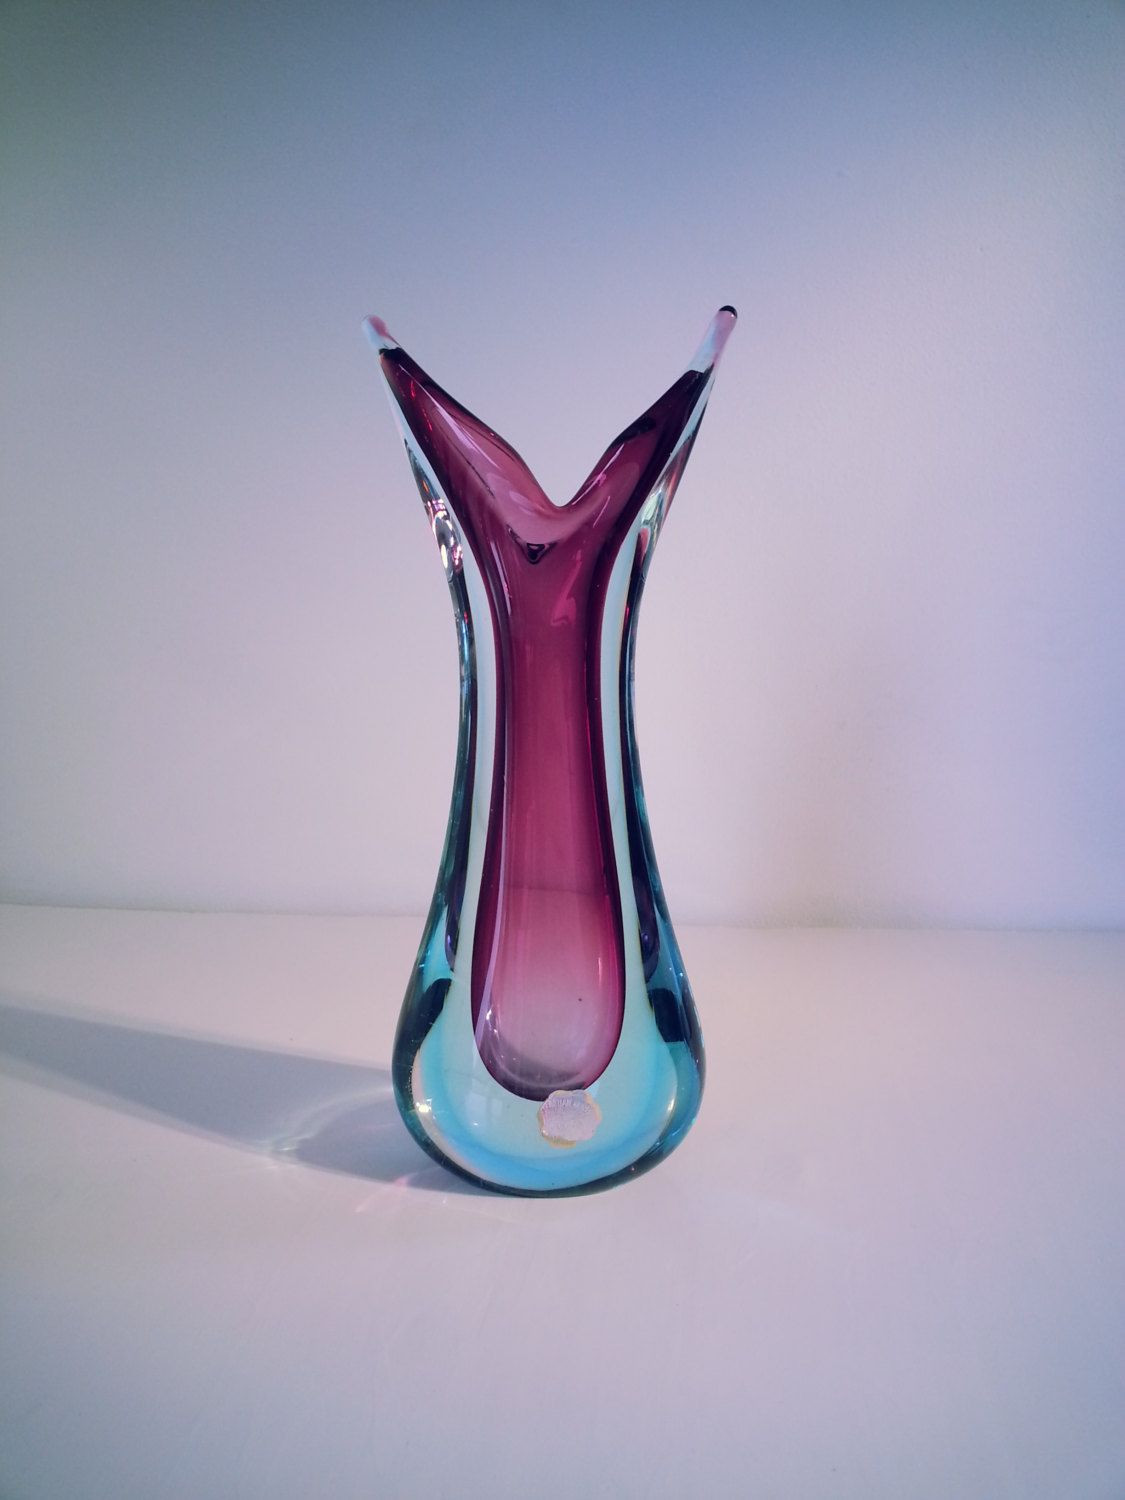 29 Recommended Red Glass Vases and Bowls 2024 free download red glass vases and bowls of murano sommerso genuine venetian glass 1950s 1960s purple blue regarding murano sommerso genuine venetian glass 1950s 1960s purple blue glass vase pulled design 